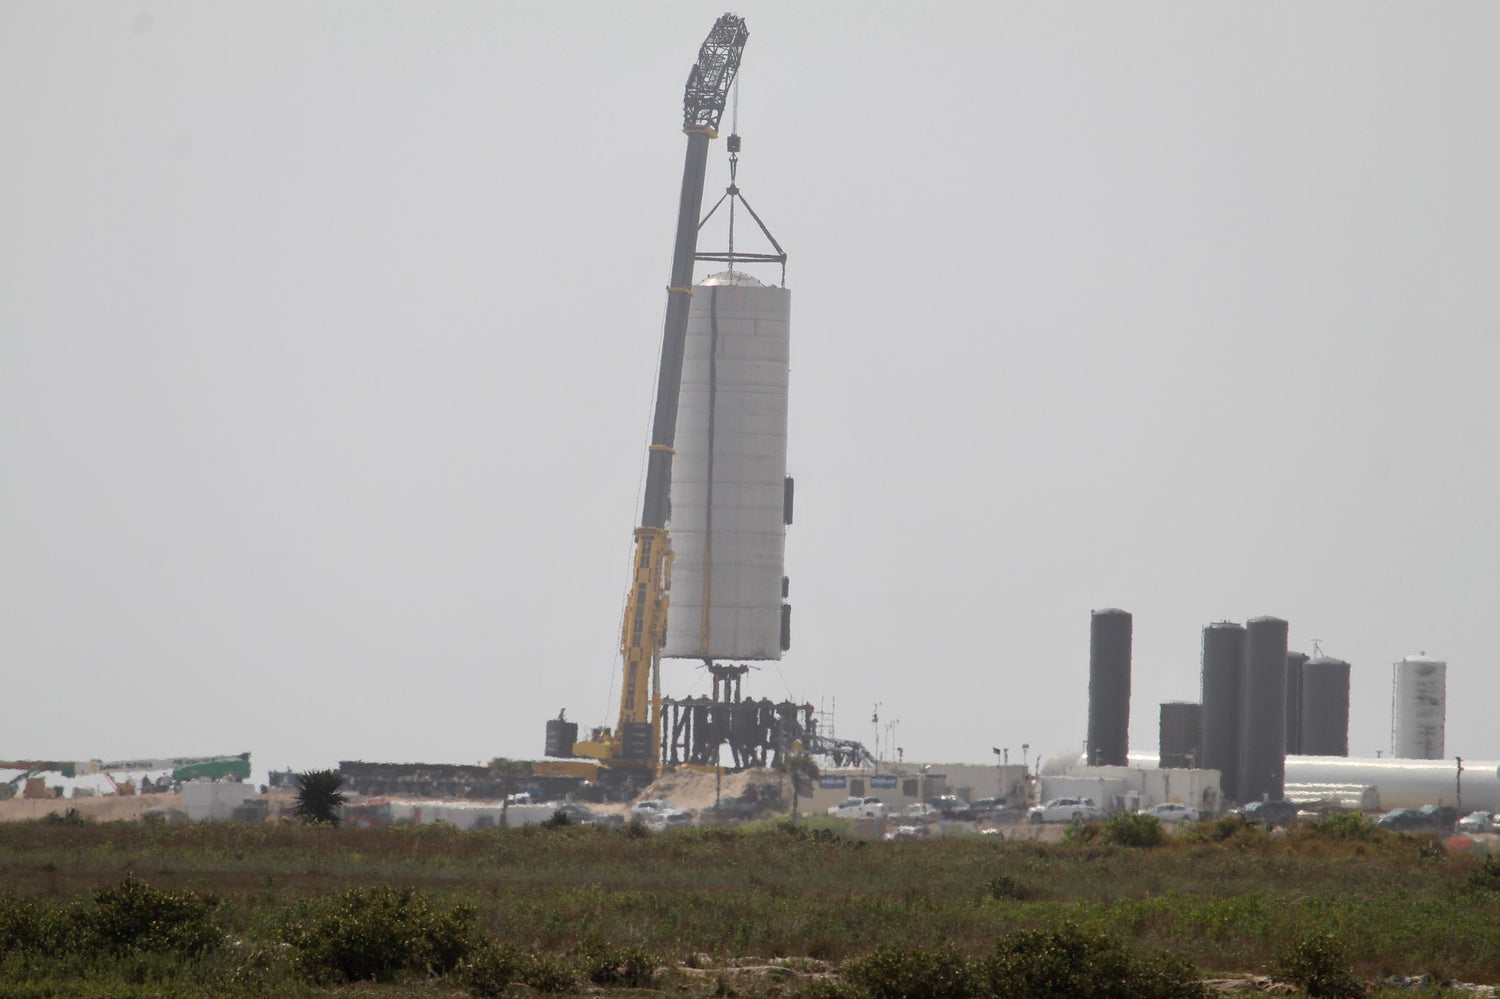 SpaceX transports Starship SN3 to the launch pad at Boca Chica  [video]